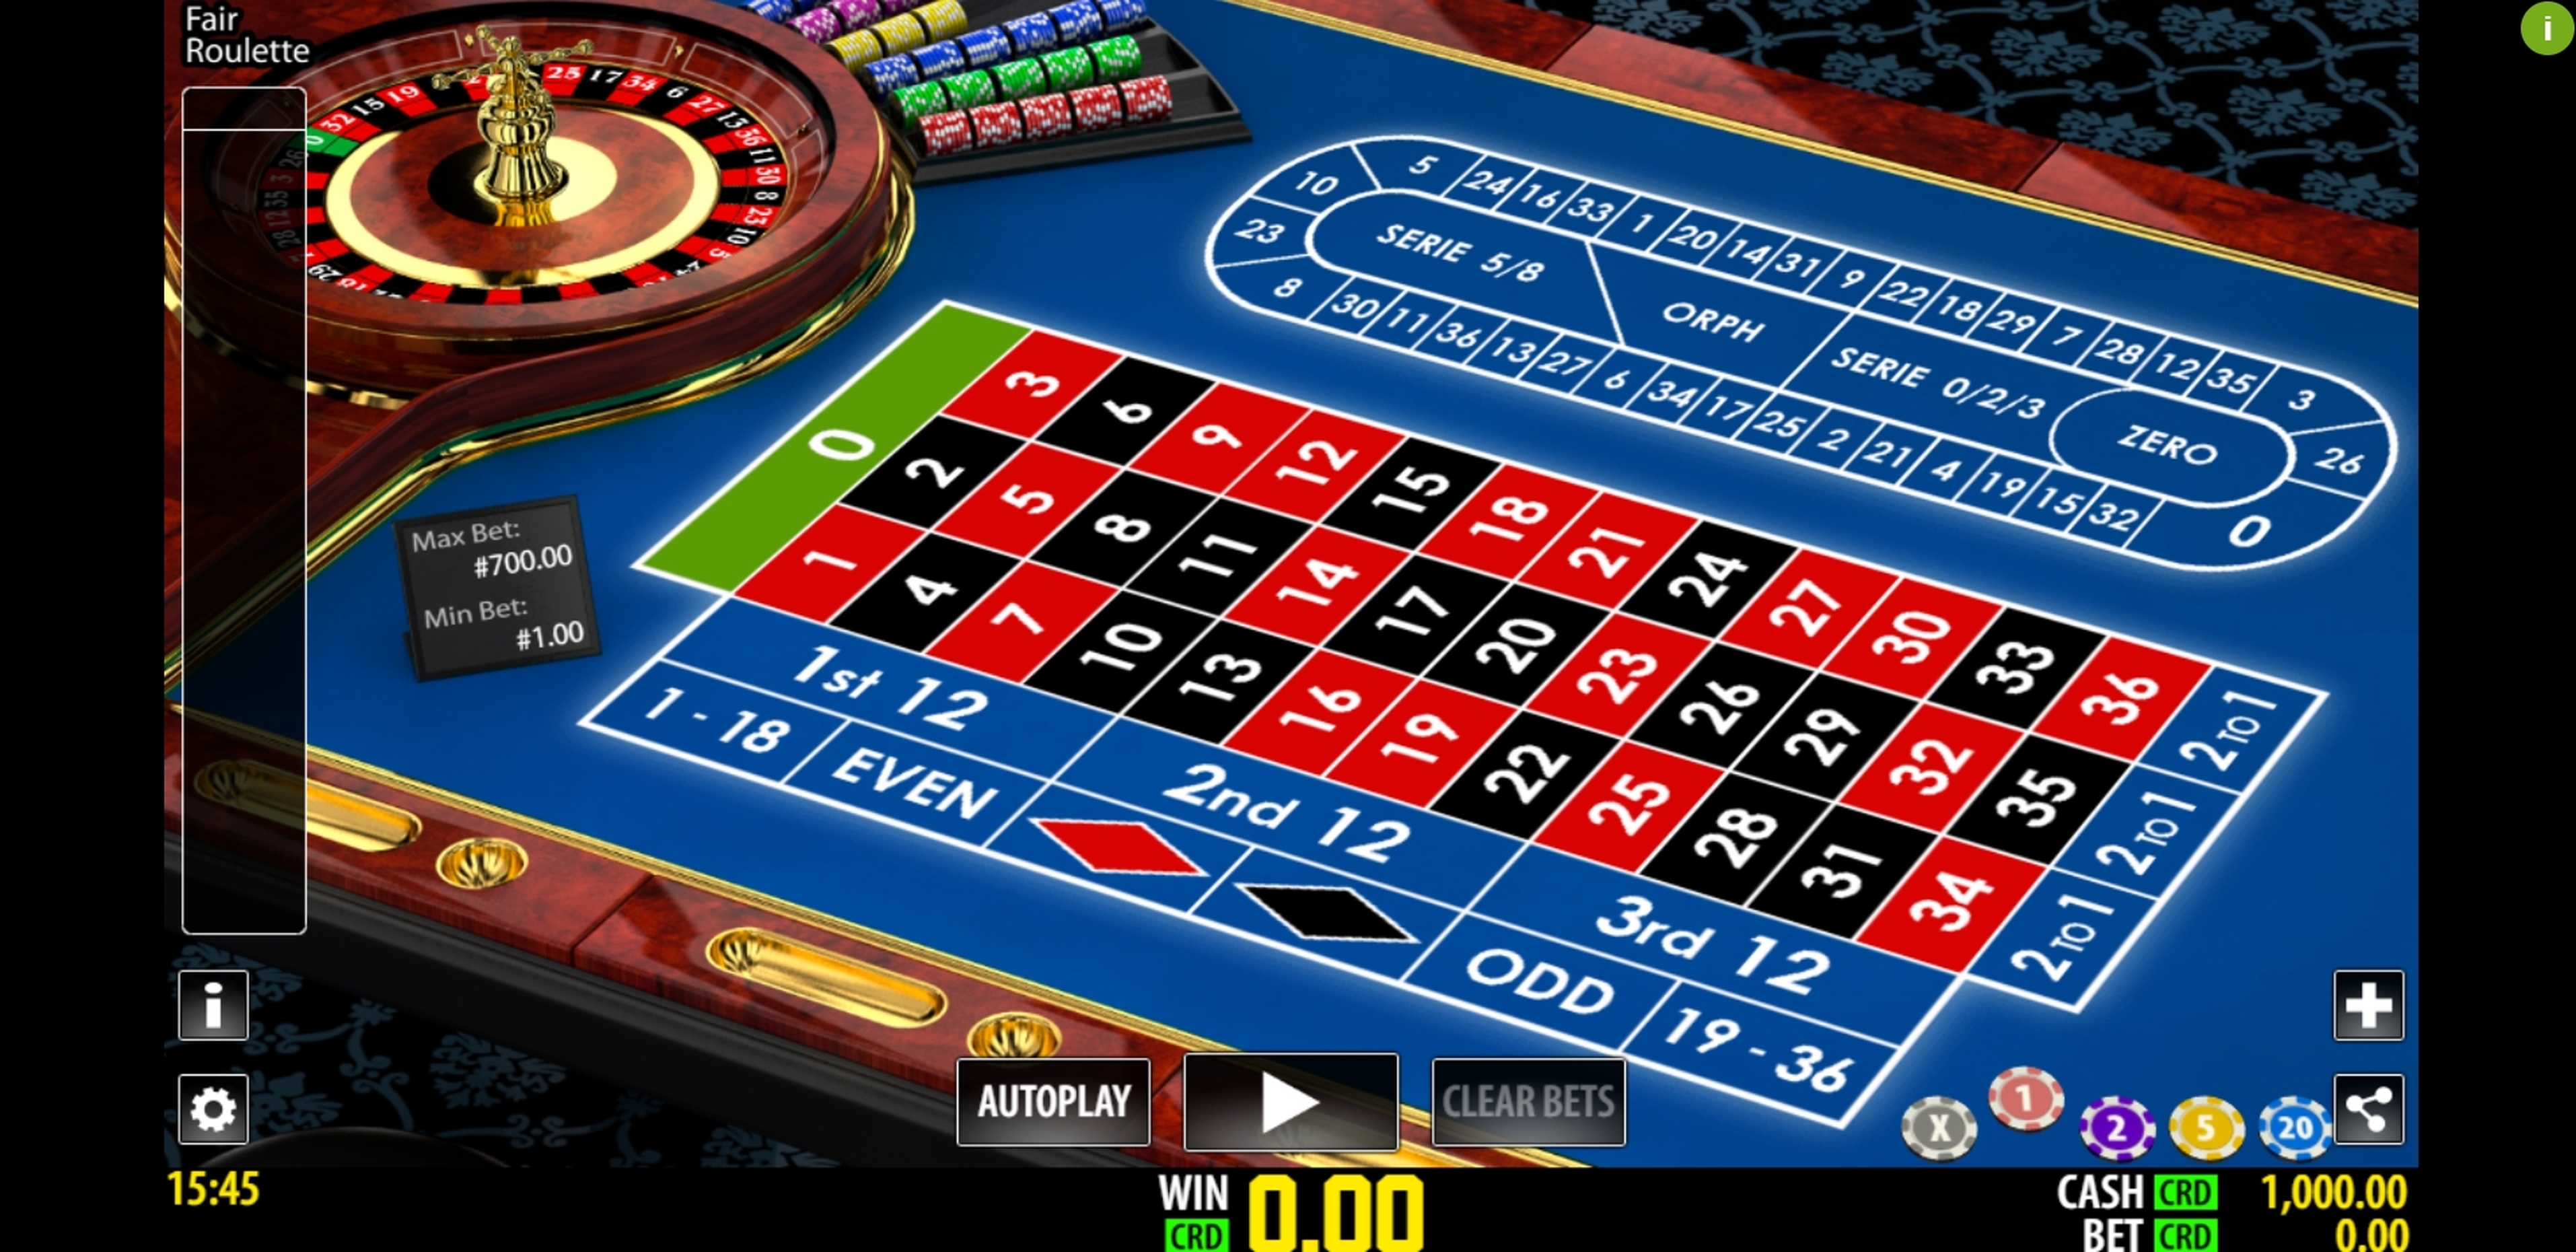 Reels in Fair Roulette Pro Slot Game by World Match